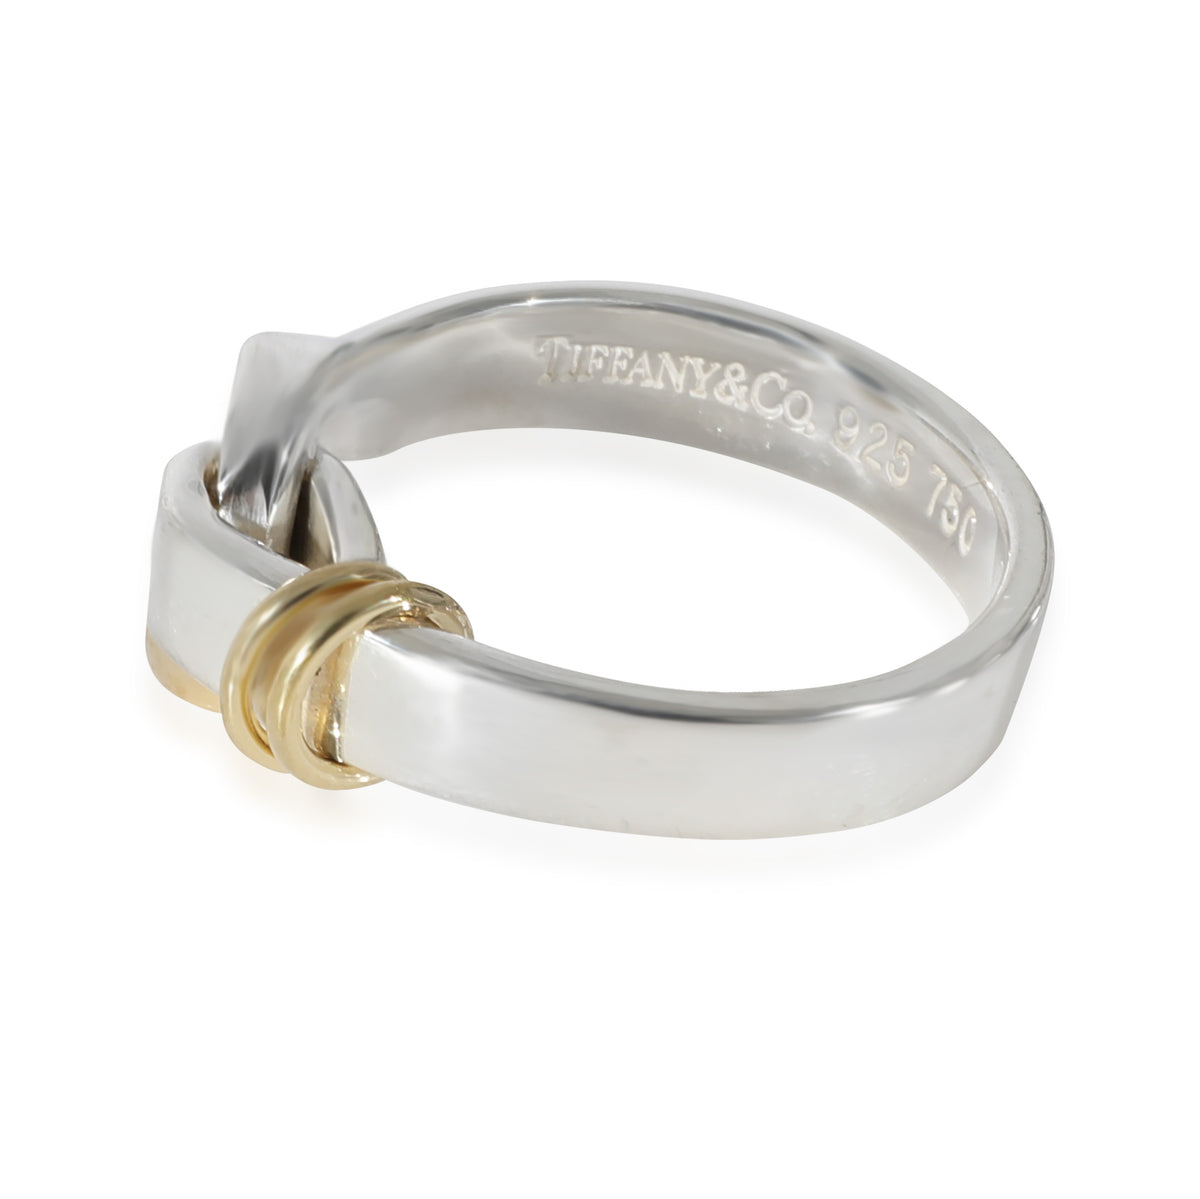 Tiffany & Co. Hook Ring in Sterling Silver & 18k Yellow Gold/Sterling Silver